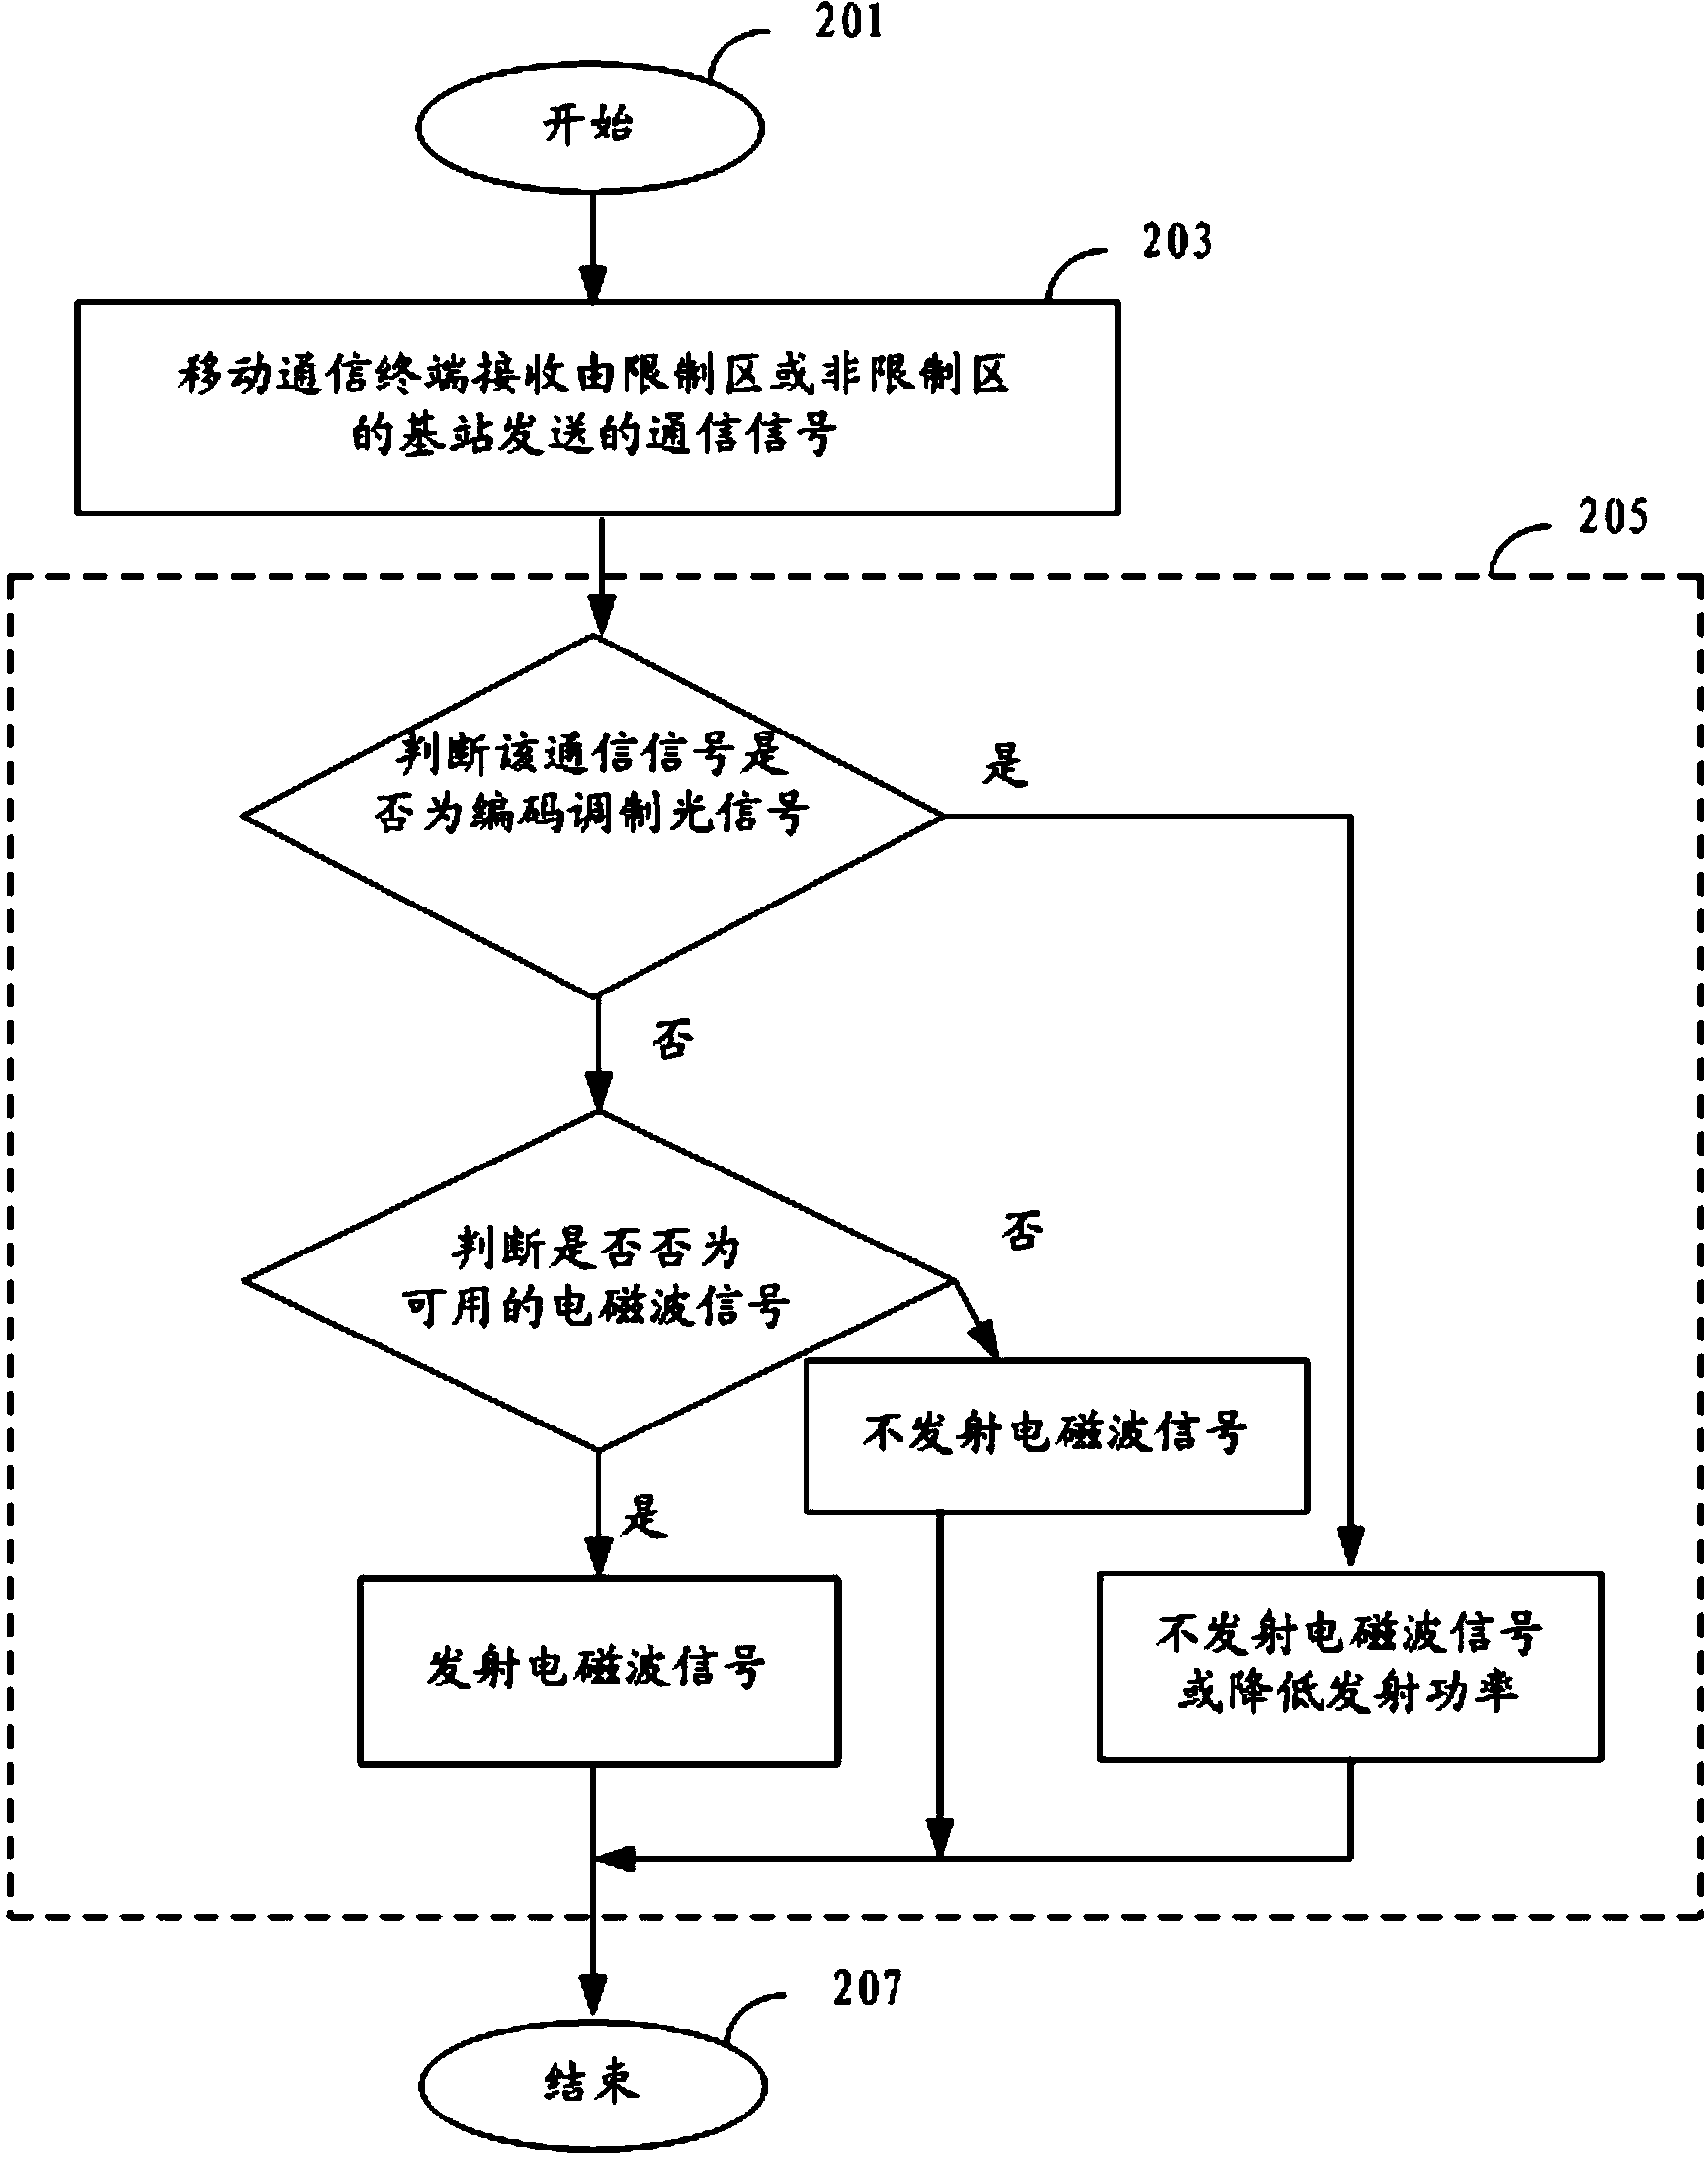 Composite mobile communication method, terminal and system for nuclear power station